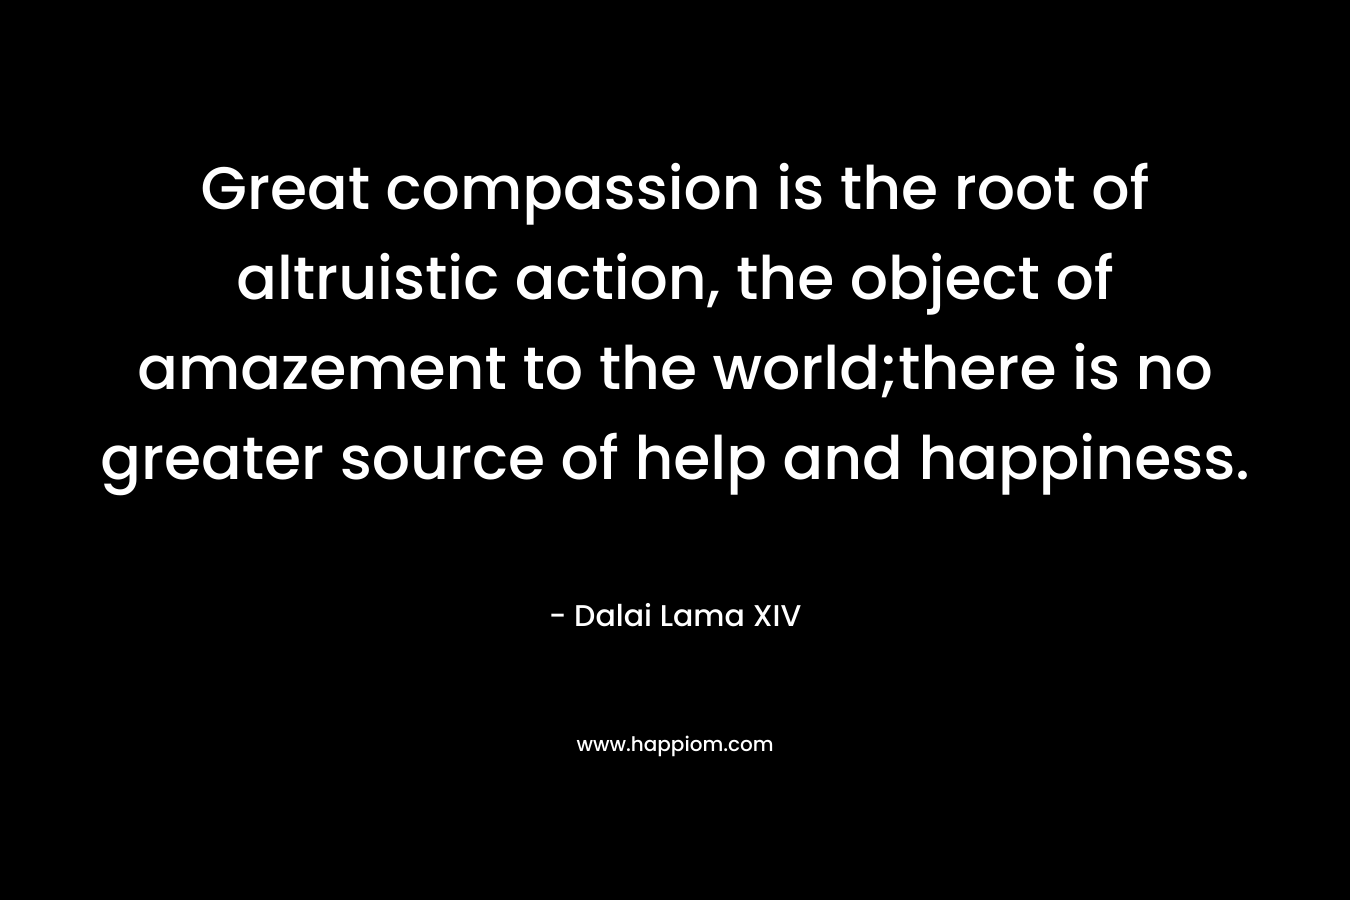 Great compassion is the root of altruistic action, the object of amazement to the world;there is no greater source of help and happiness.